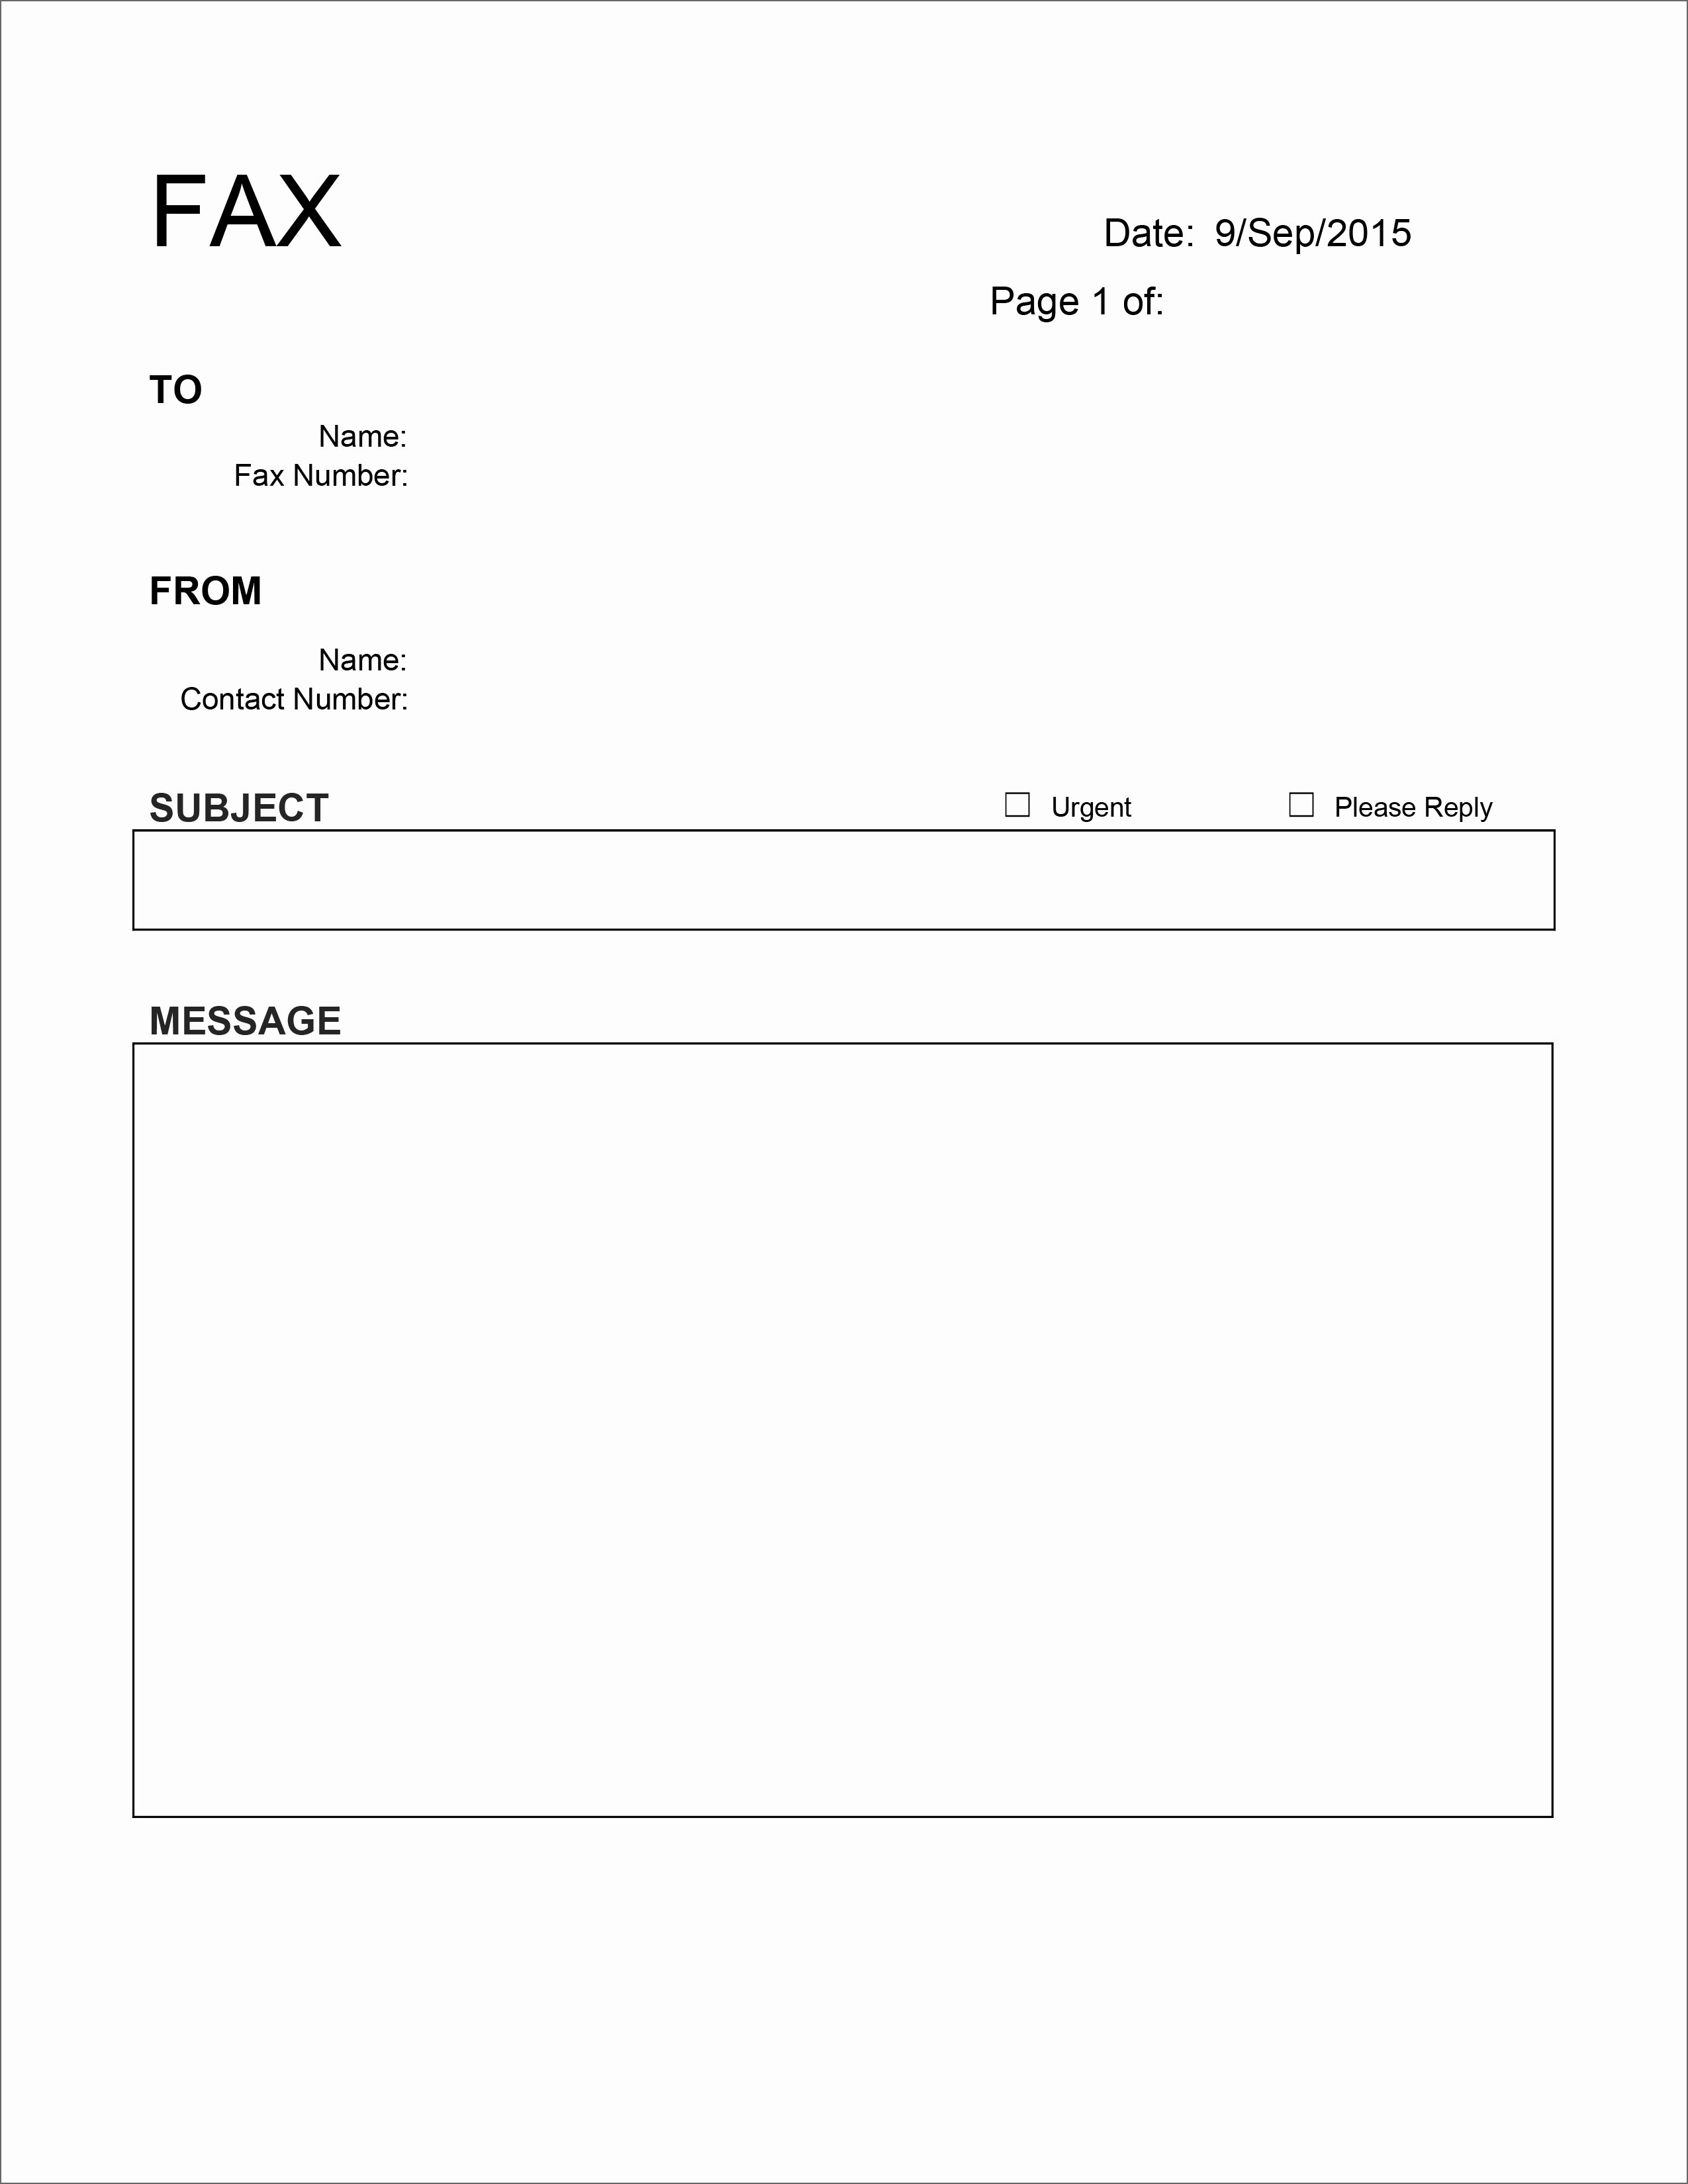 Fax Cover Sheet format Lovely 20 Free Fax Cover Templates Sheets In Microsoft Fice Docx